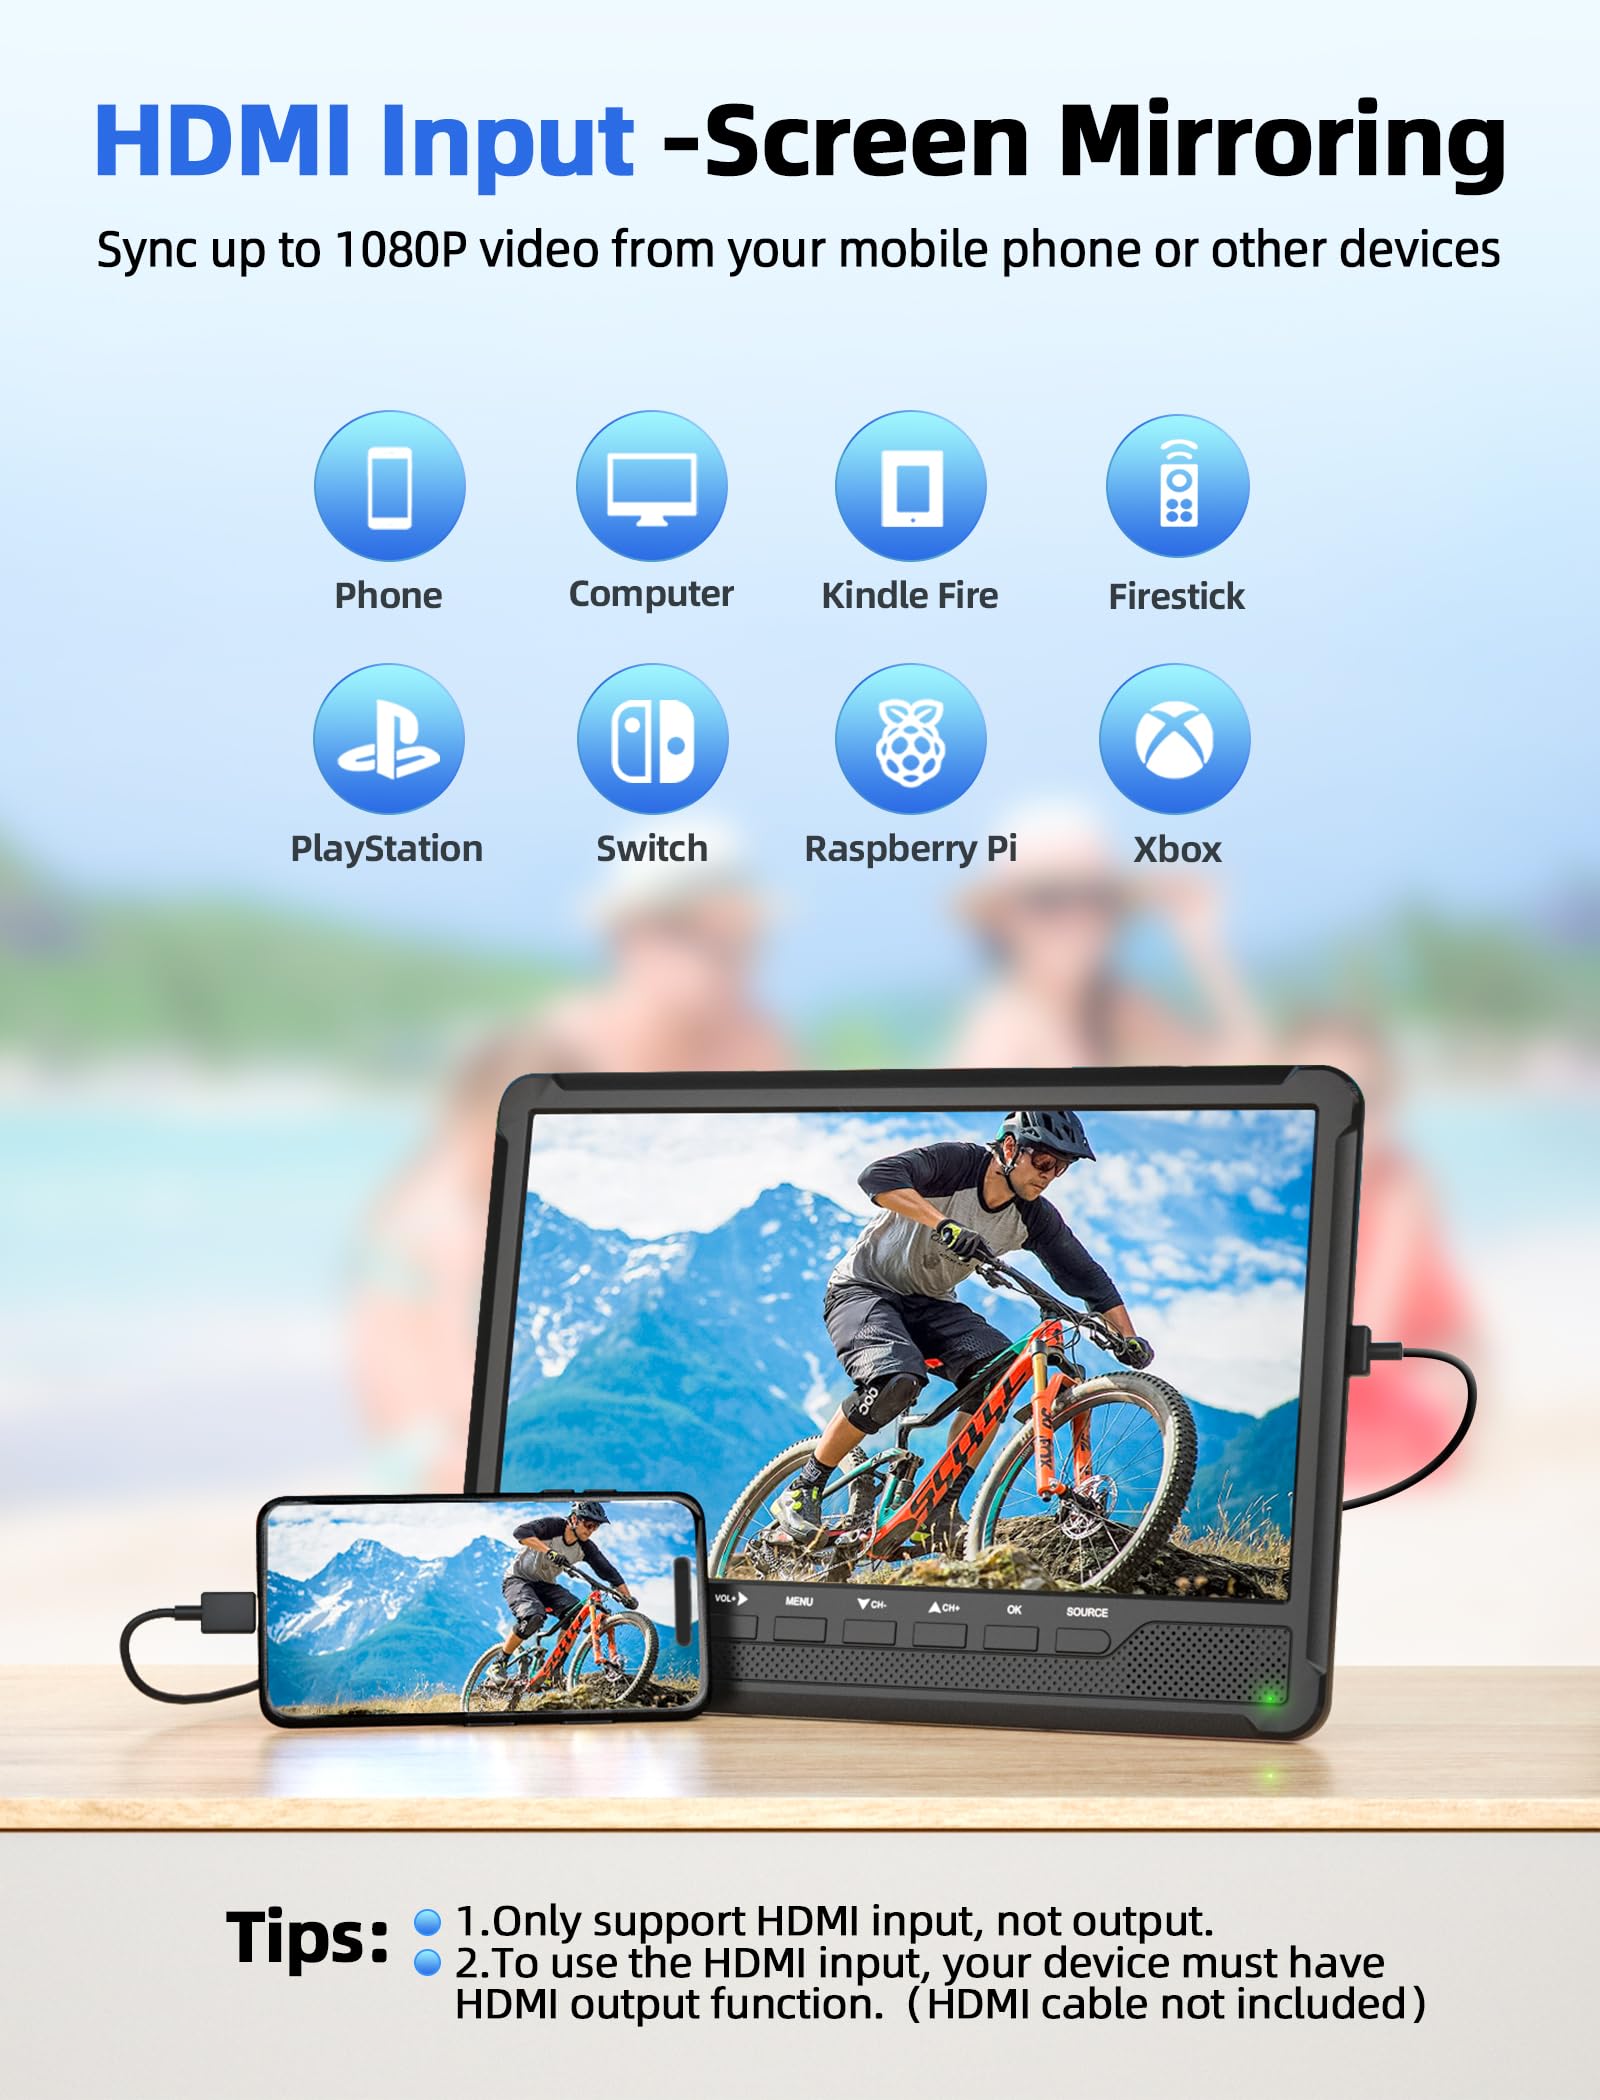 DESOBRY 11.5" Portable TV with Antenna Atsc Tune, 10.5" HD IPS Screen Rechargeable Mini TV Portable with Dual Speaker Stand, Support HDMI USB RCA Input, Small TV for Kitchen Camping Car